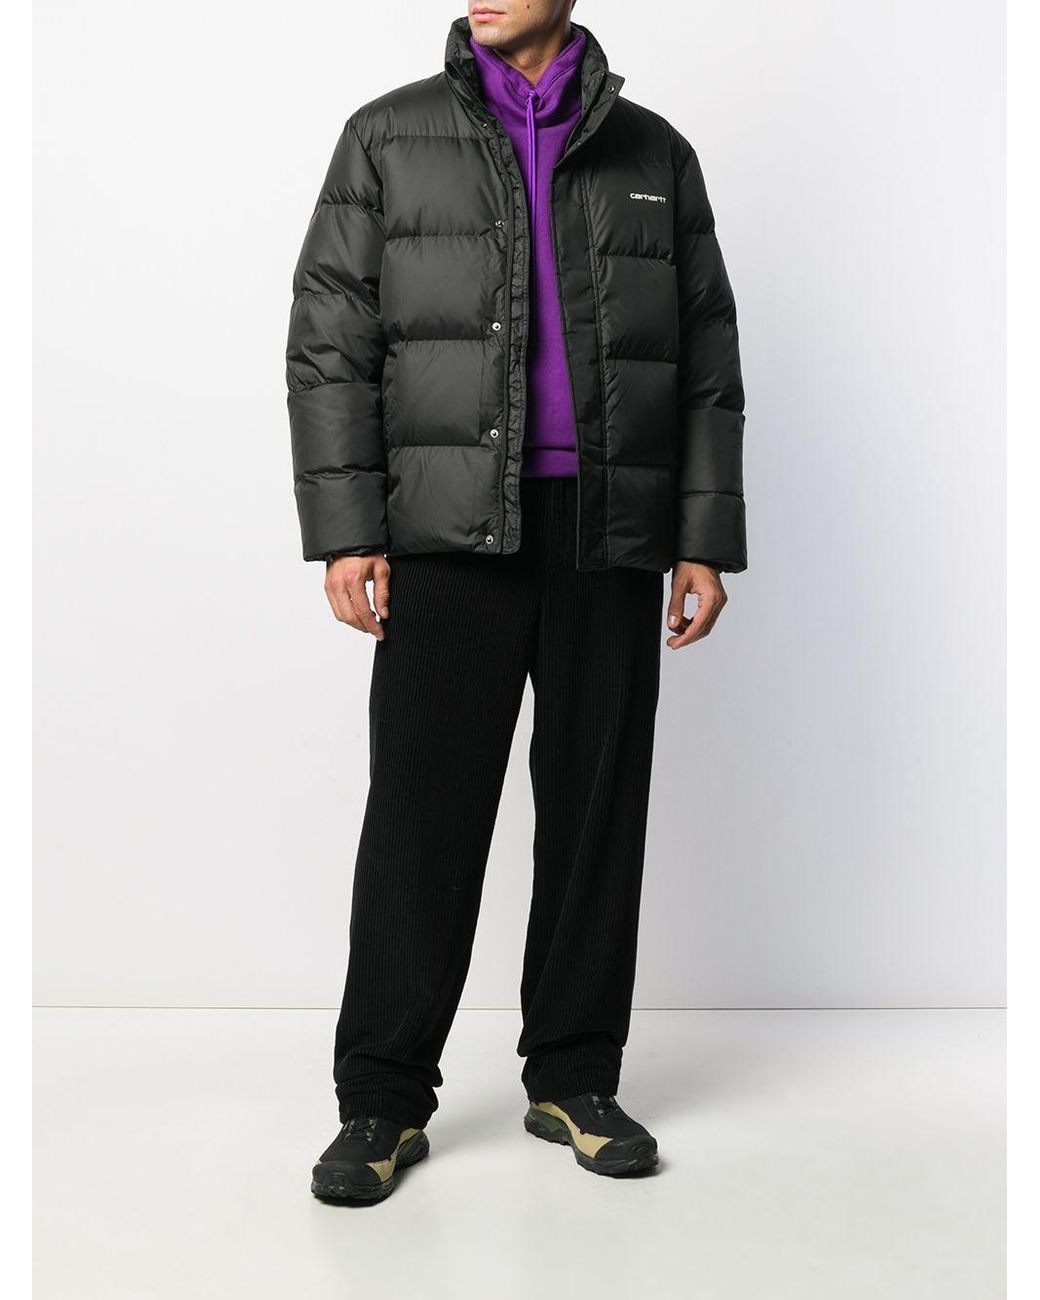 Carhartt WIP Deming Feather Down Jacket in Black for Men | Lyst